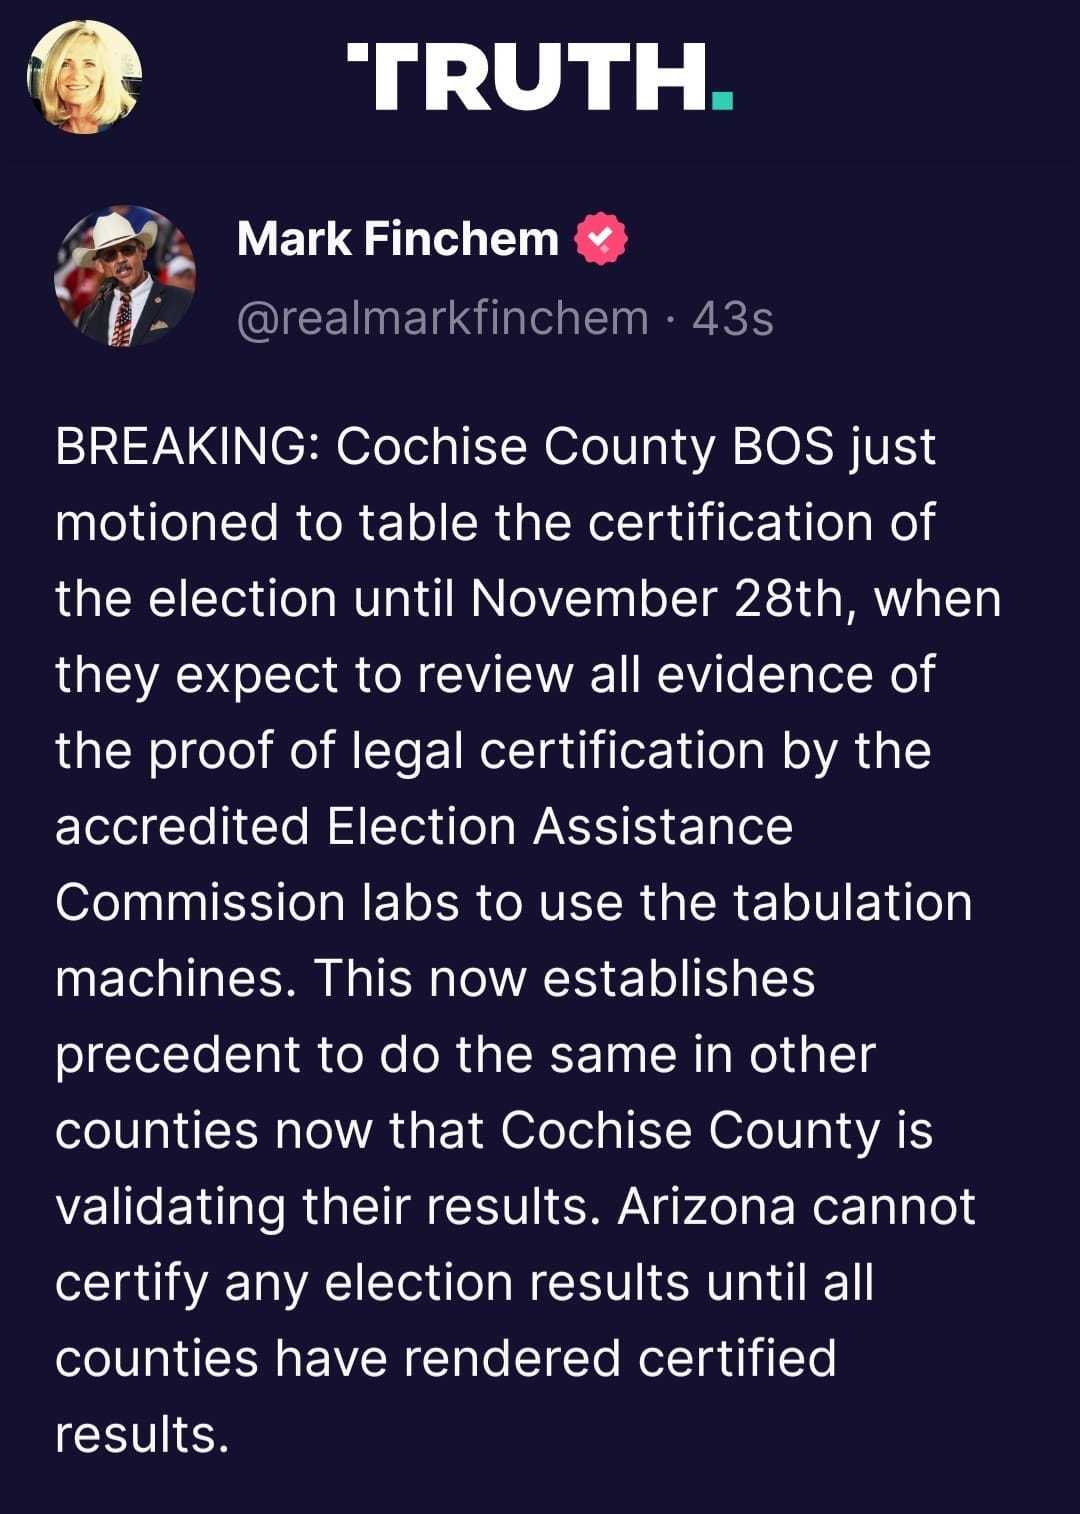 May be an image of 3 people and text that says 'TRUTH. Mark Finchem @realmarkfinchem 43s BREAKING: Cochise County BOS just motioned to table the certification of the election until November 28th, when they expect to review all evidence of the proof of legal certification by the accredited Election Assistance Commission labs to use the tabulation machines. This now establishes precedent to do the same in other counties now that Cochise County is validating their results. Arizona cannot certify any election results until all counties have rendered certified results.'